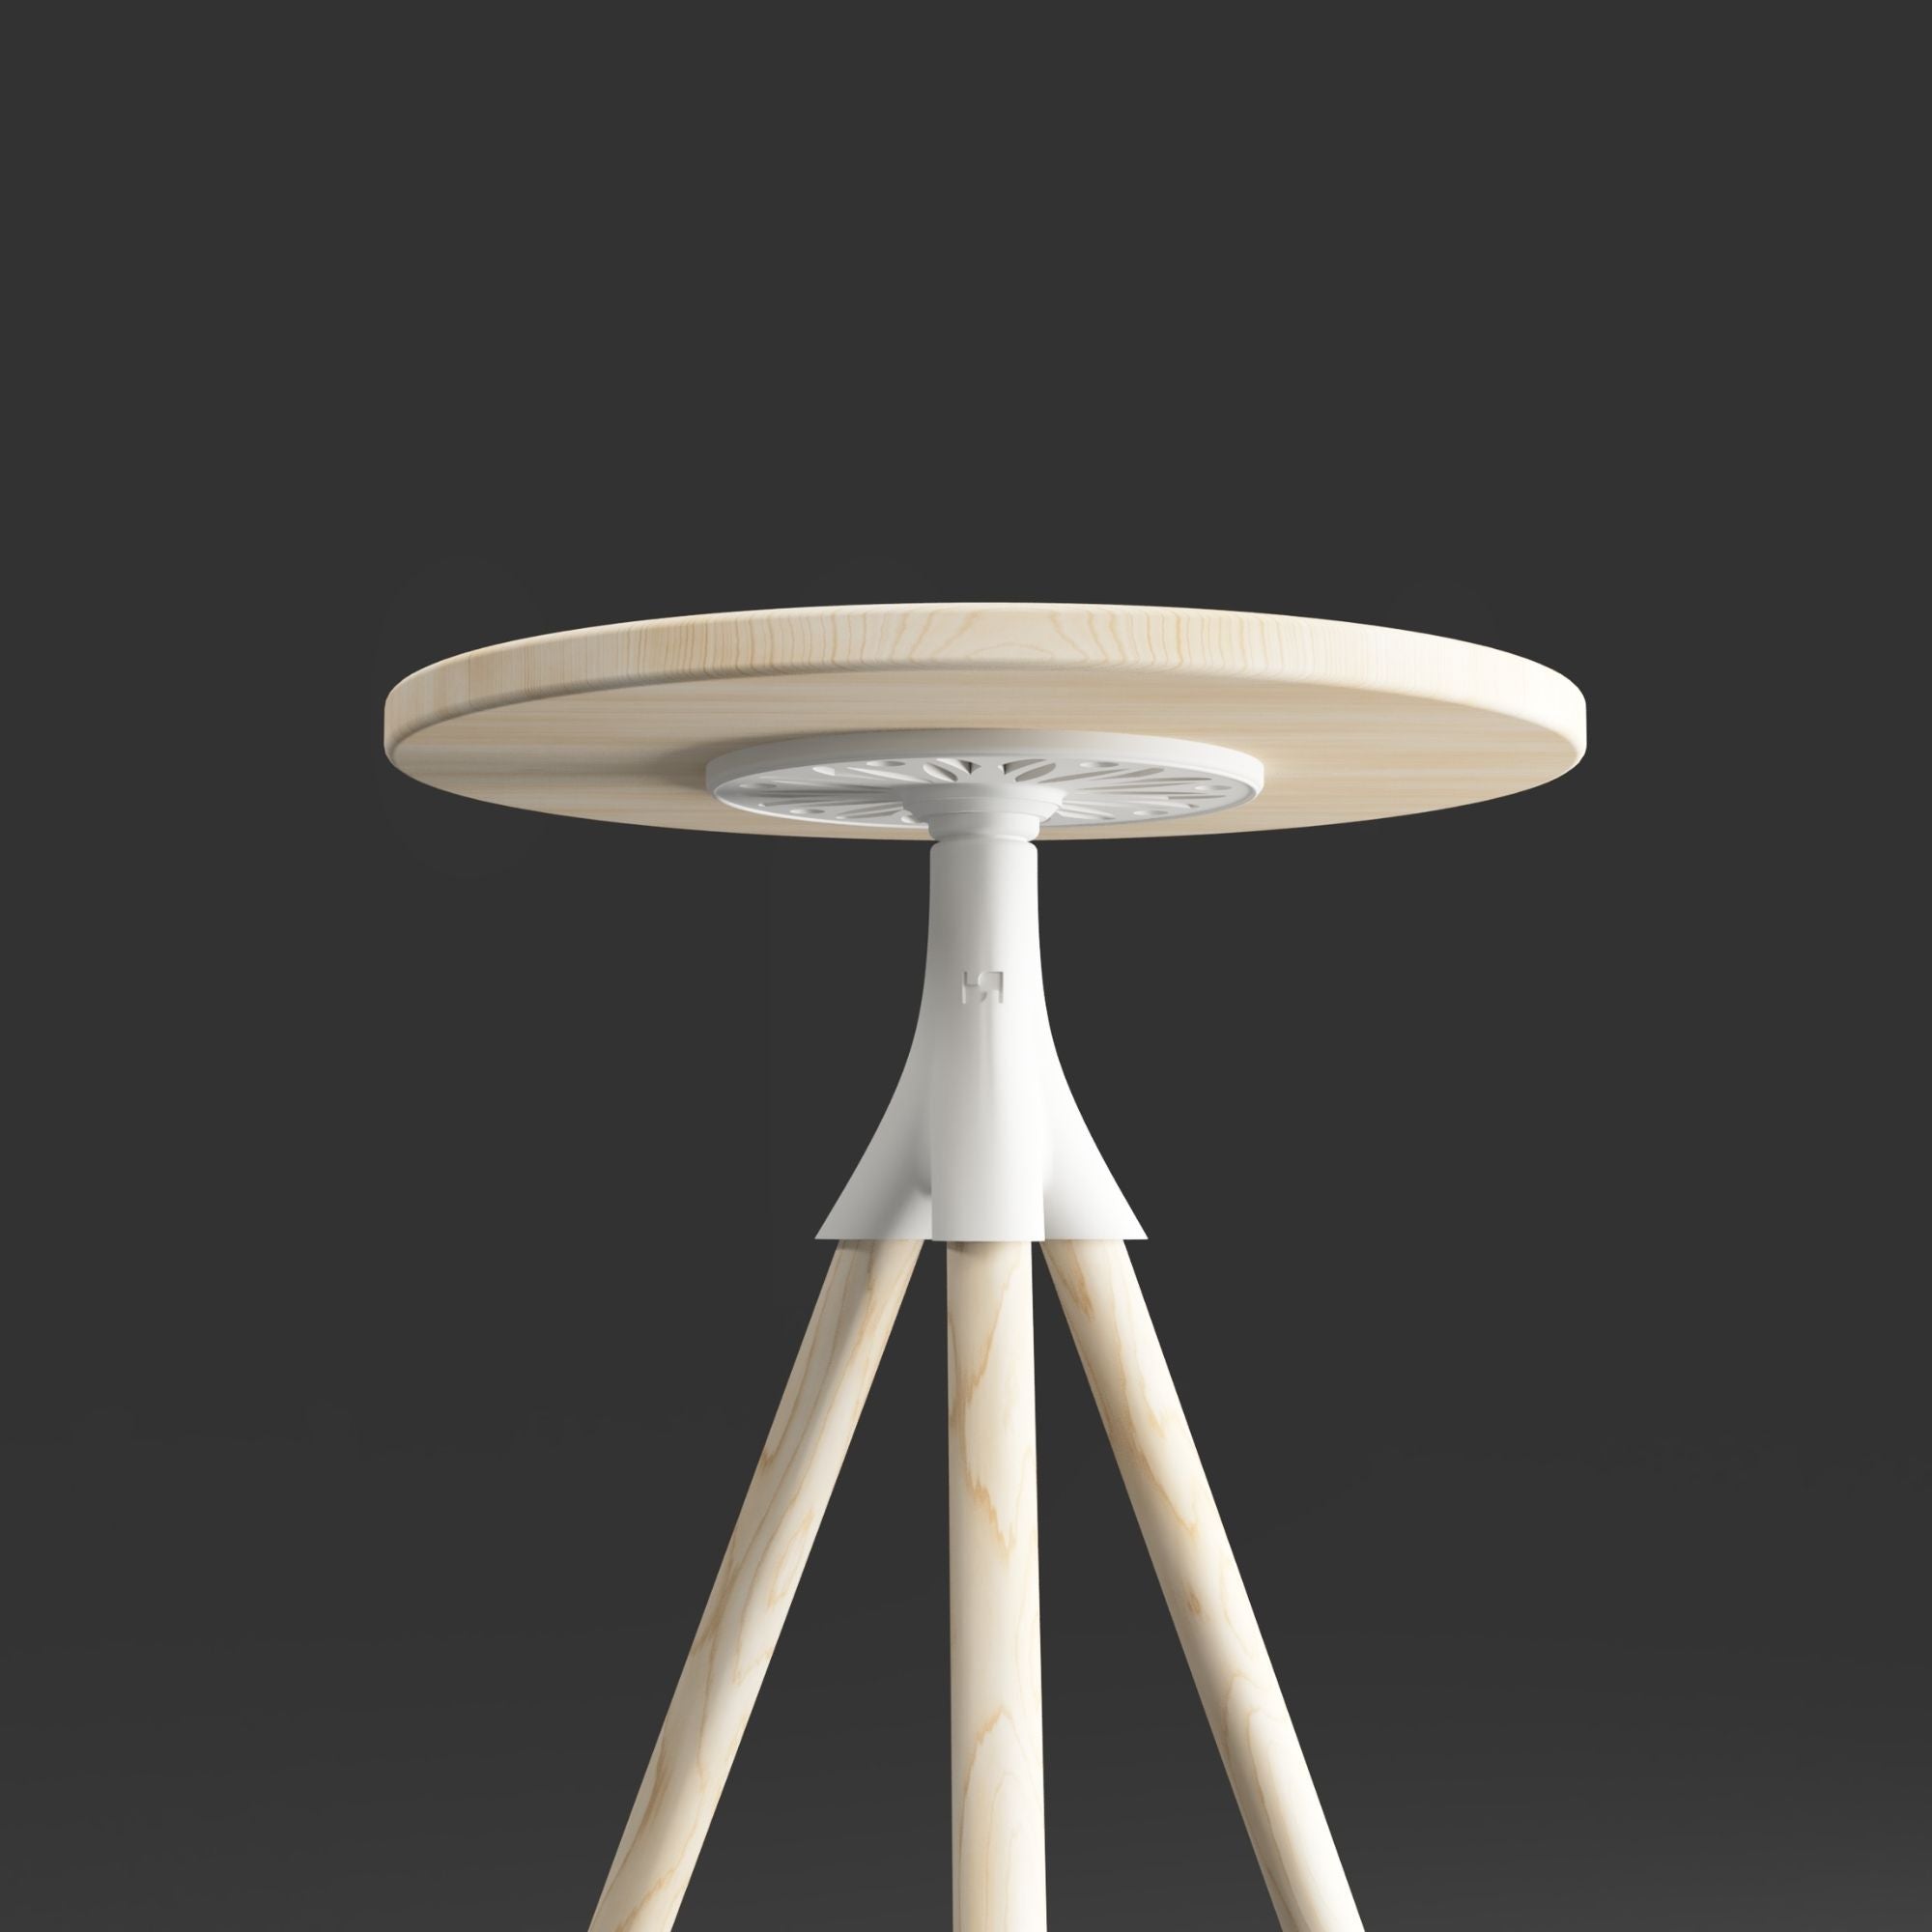 Brisk 3D Design Table / STL Coffee Table / Digital File / STL File / Ready for 3D Printing / Files for 3D Printers